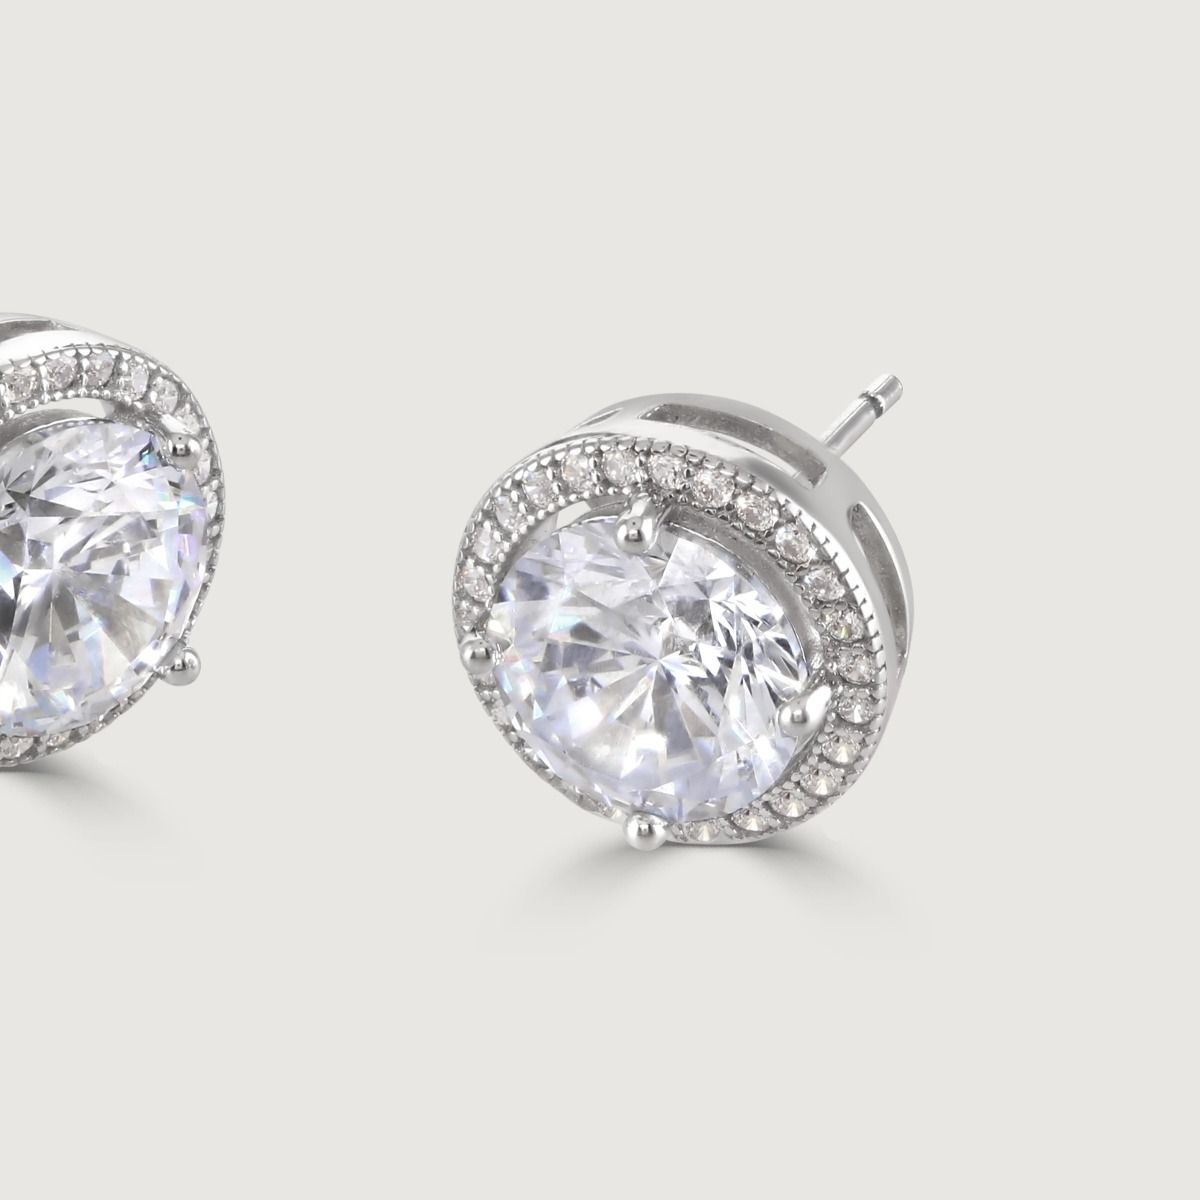 These dazzling stud earrings are set with a halo of flawlessly cut cubic zirconia stones, surrounding a dazzling round clear centre stone for a diamond inspired look. Wear to add timeless glamour to any look.